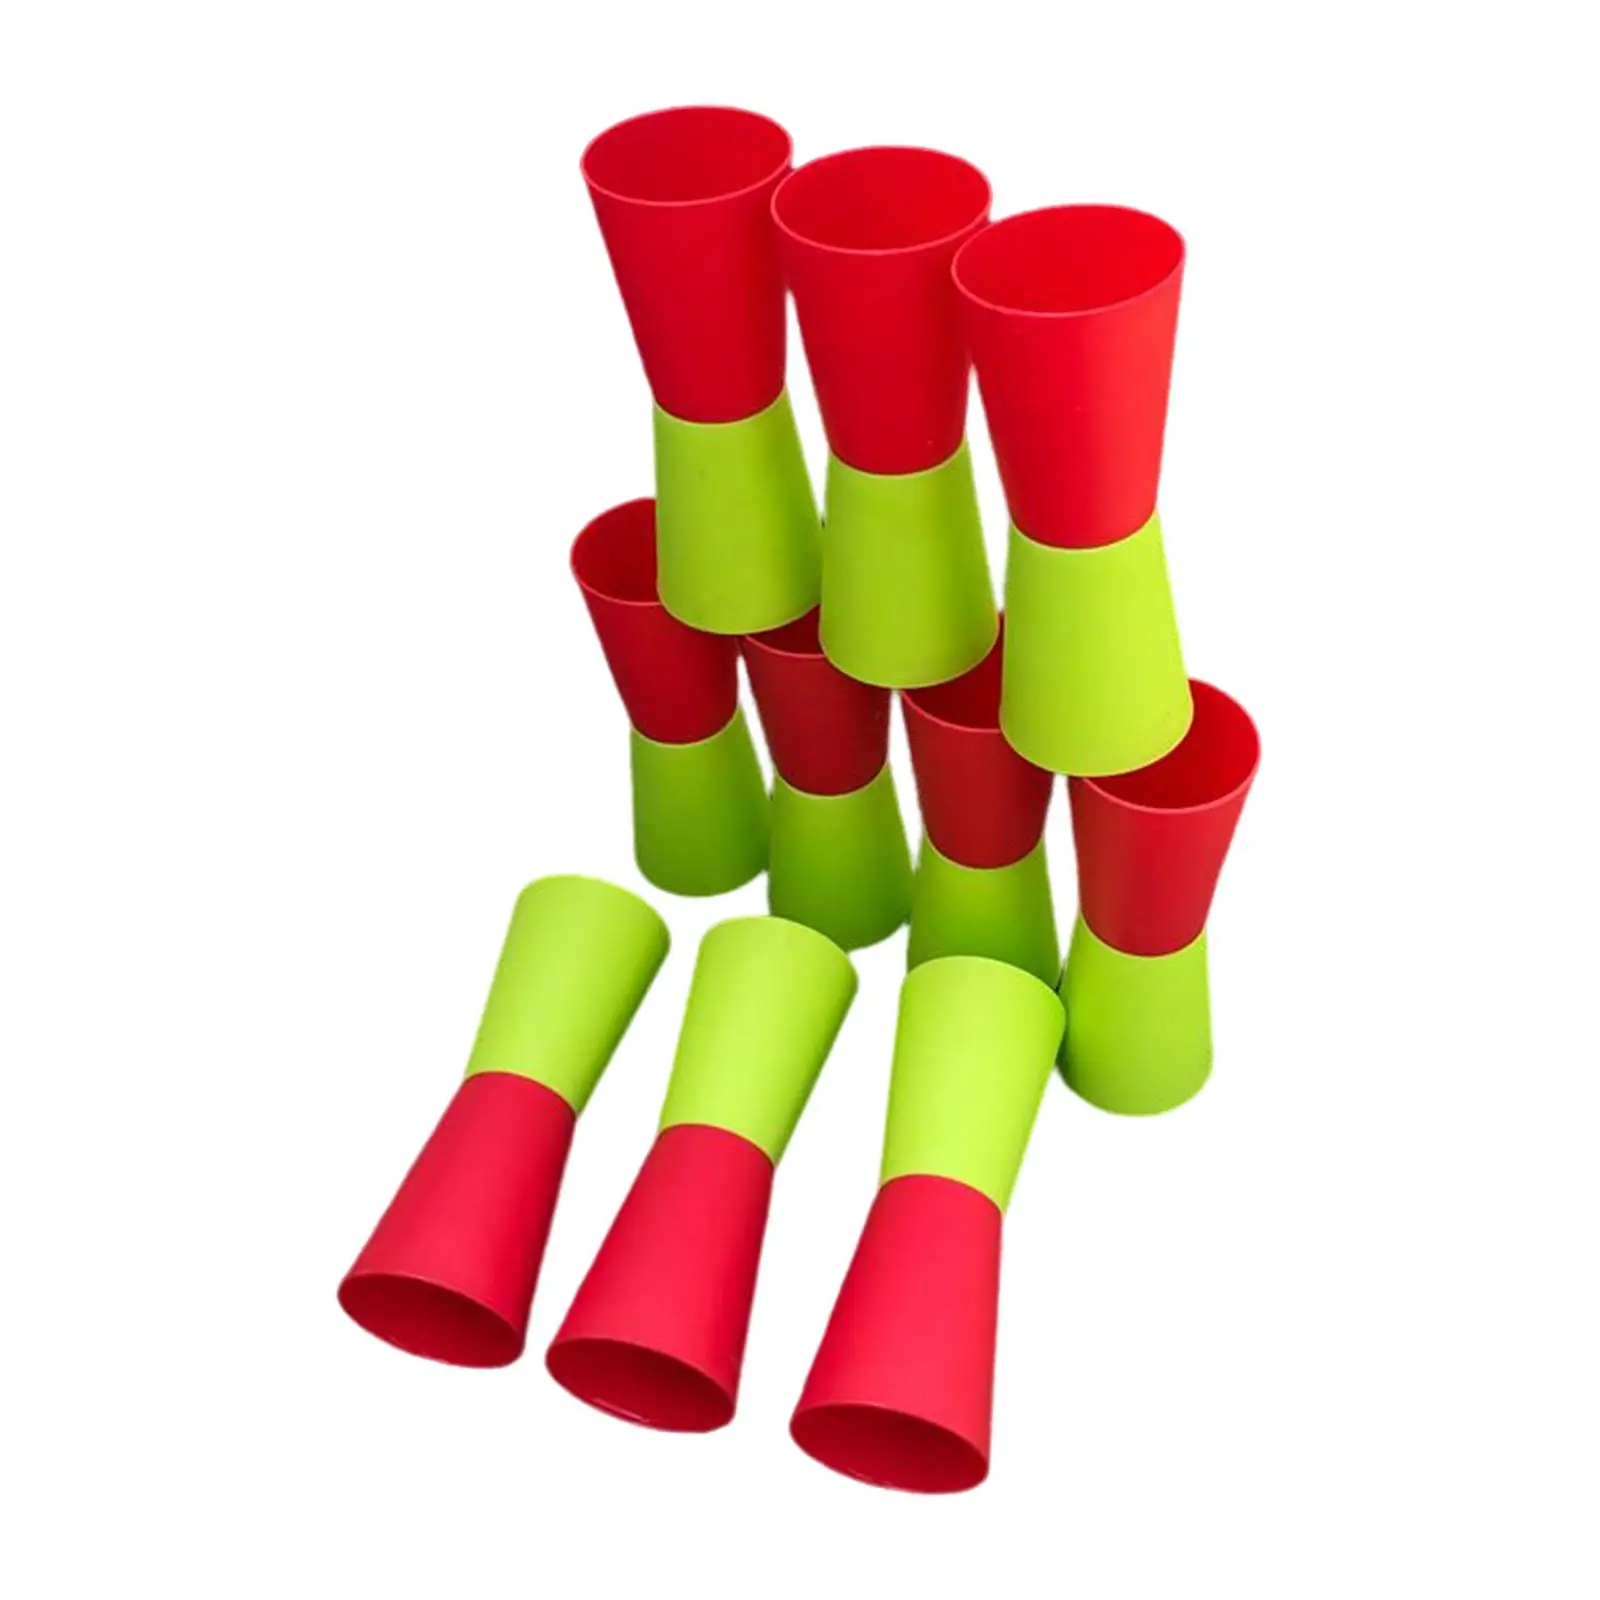 10Pcs Flip Cups Speed Agility Training Sport Equipment Sensory Integration Aid Reversed Cups for Football Gym Rugby Basketball